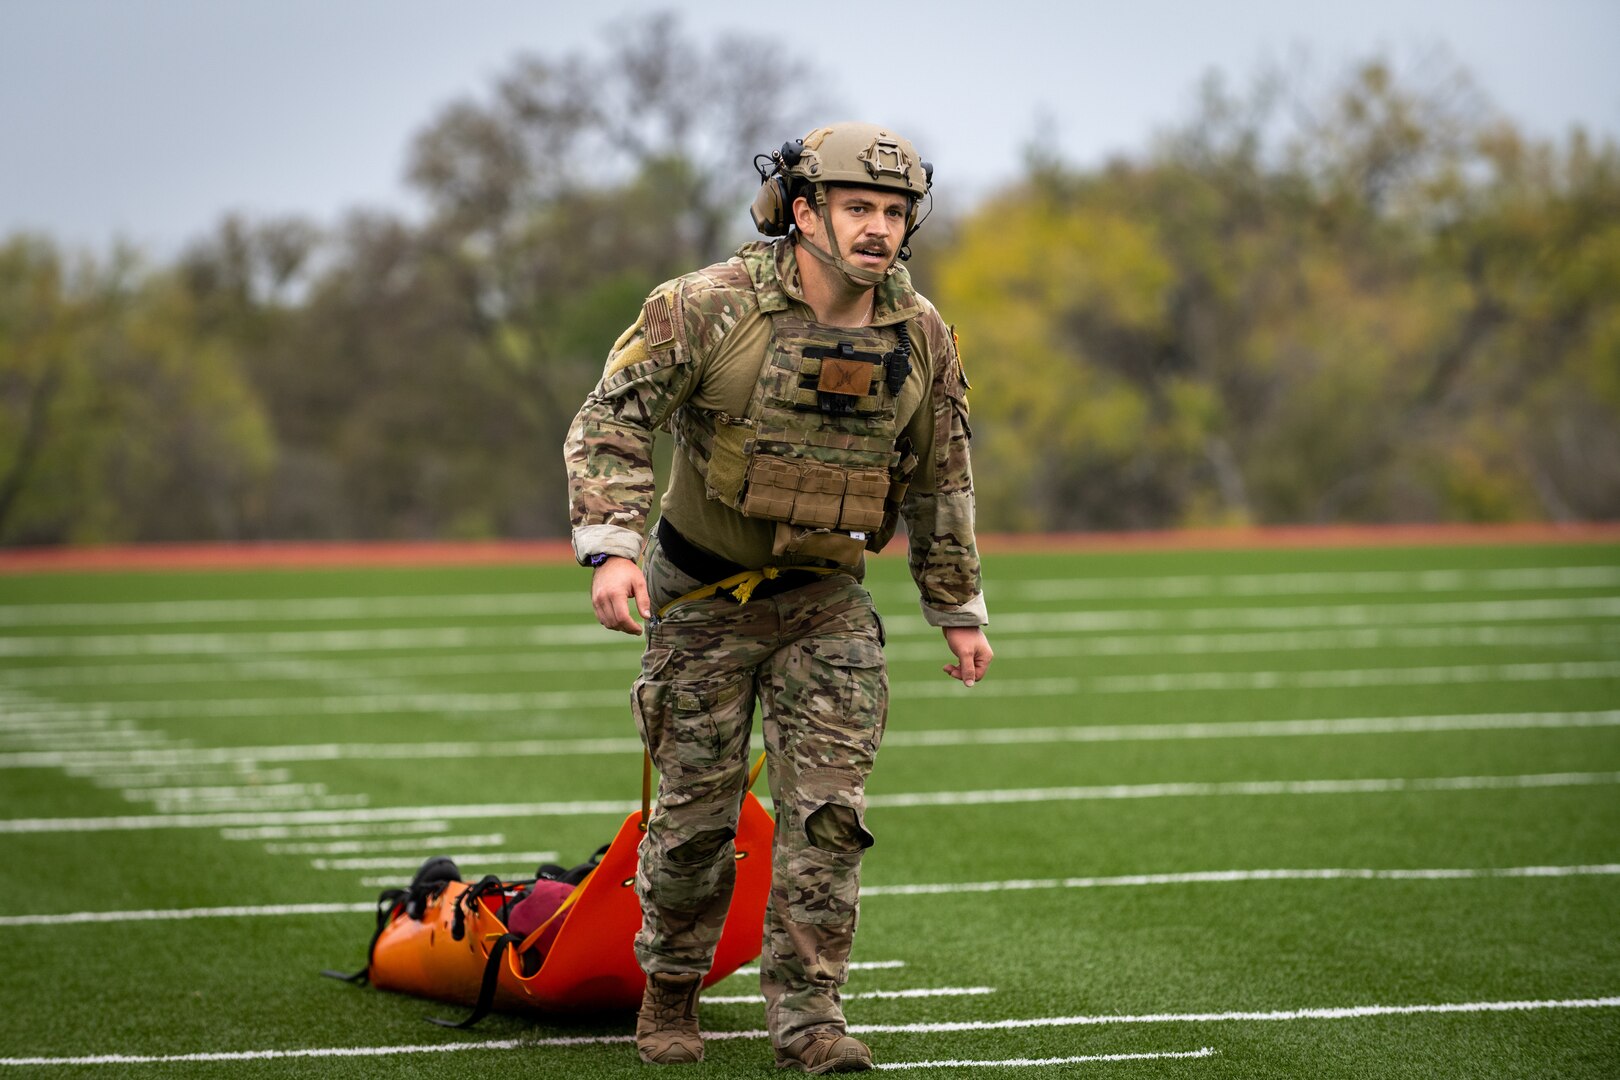 A Tactical Air Control Party Airman executes a casualty evacuation exercise during Lightning Challenge 2022, at Joint Base San Antonio-Chapman Annex, Texas, Nov. 3, 2022. The Lightning Challenge is an annual service-level TACP competition to identify the best TACP Airmen in the Air Force.